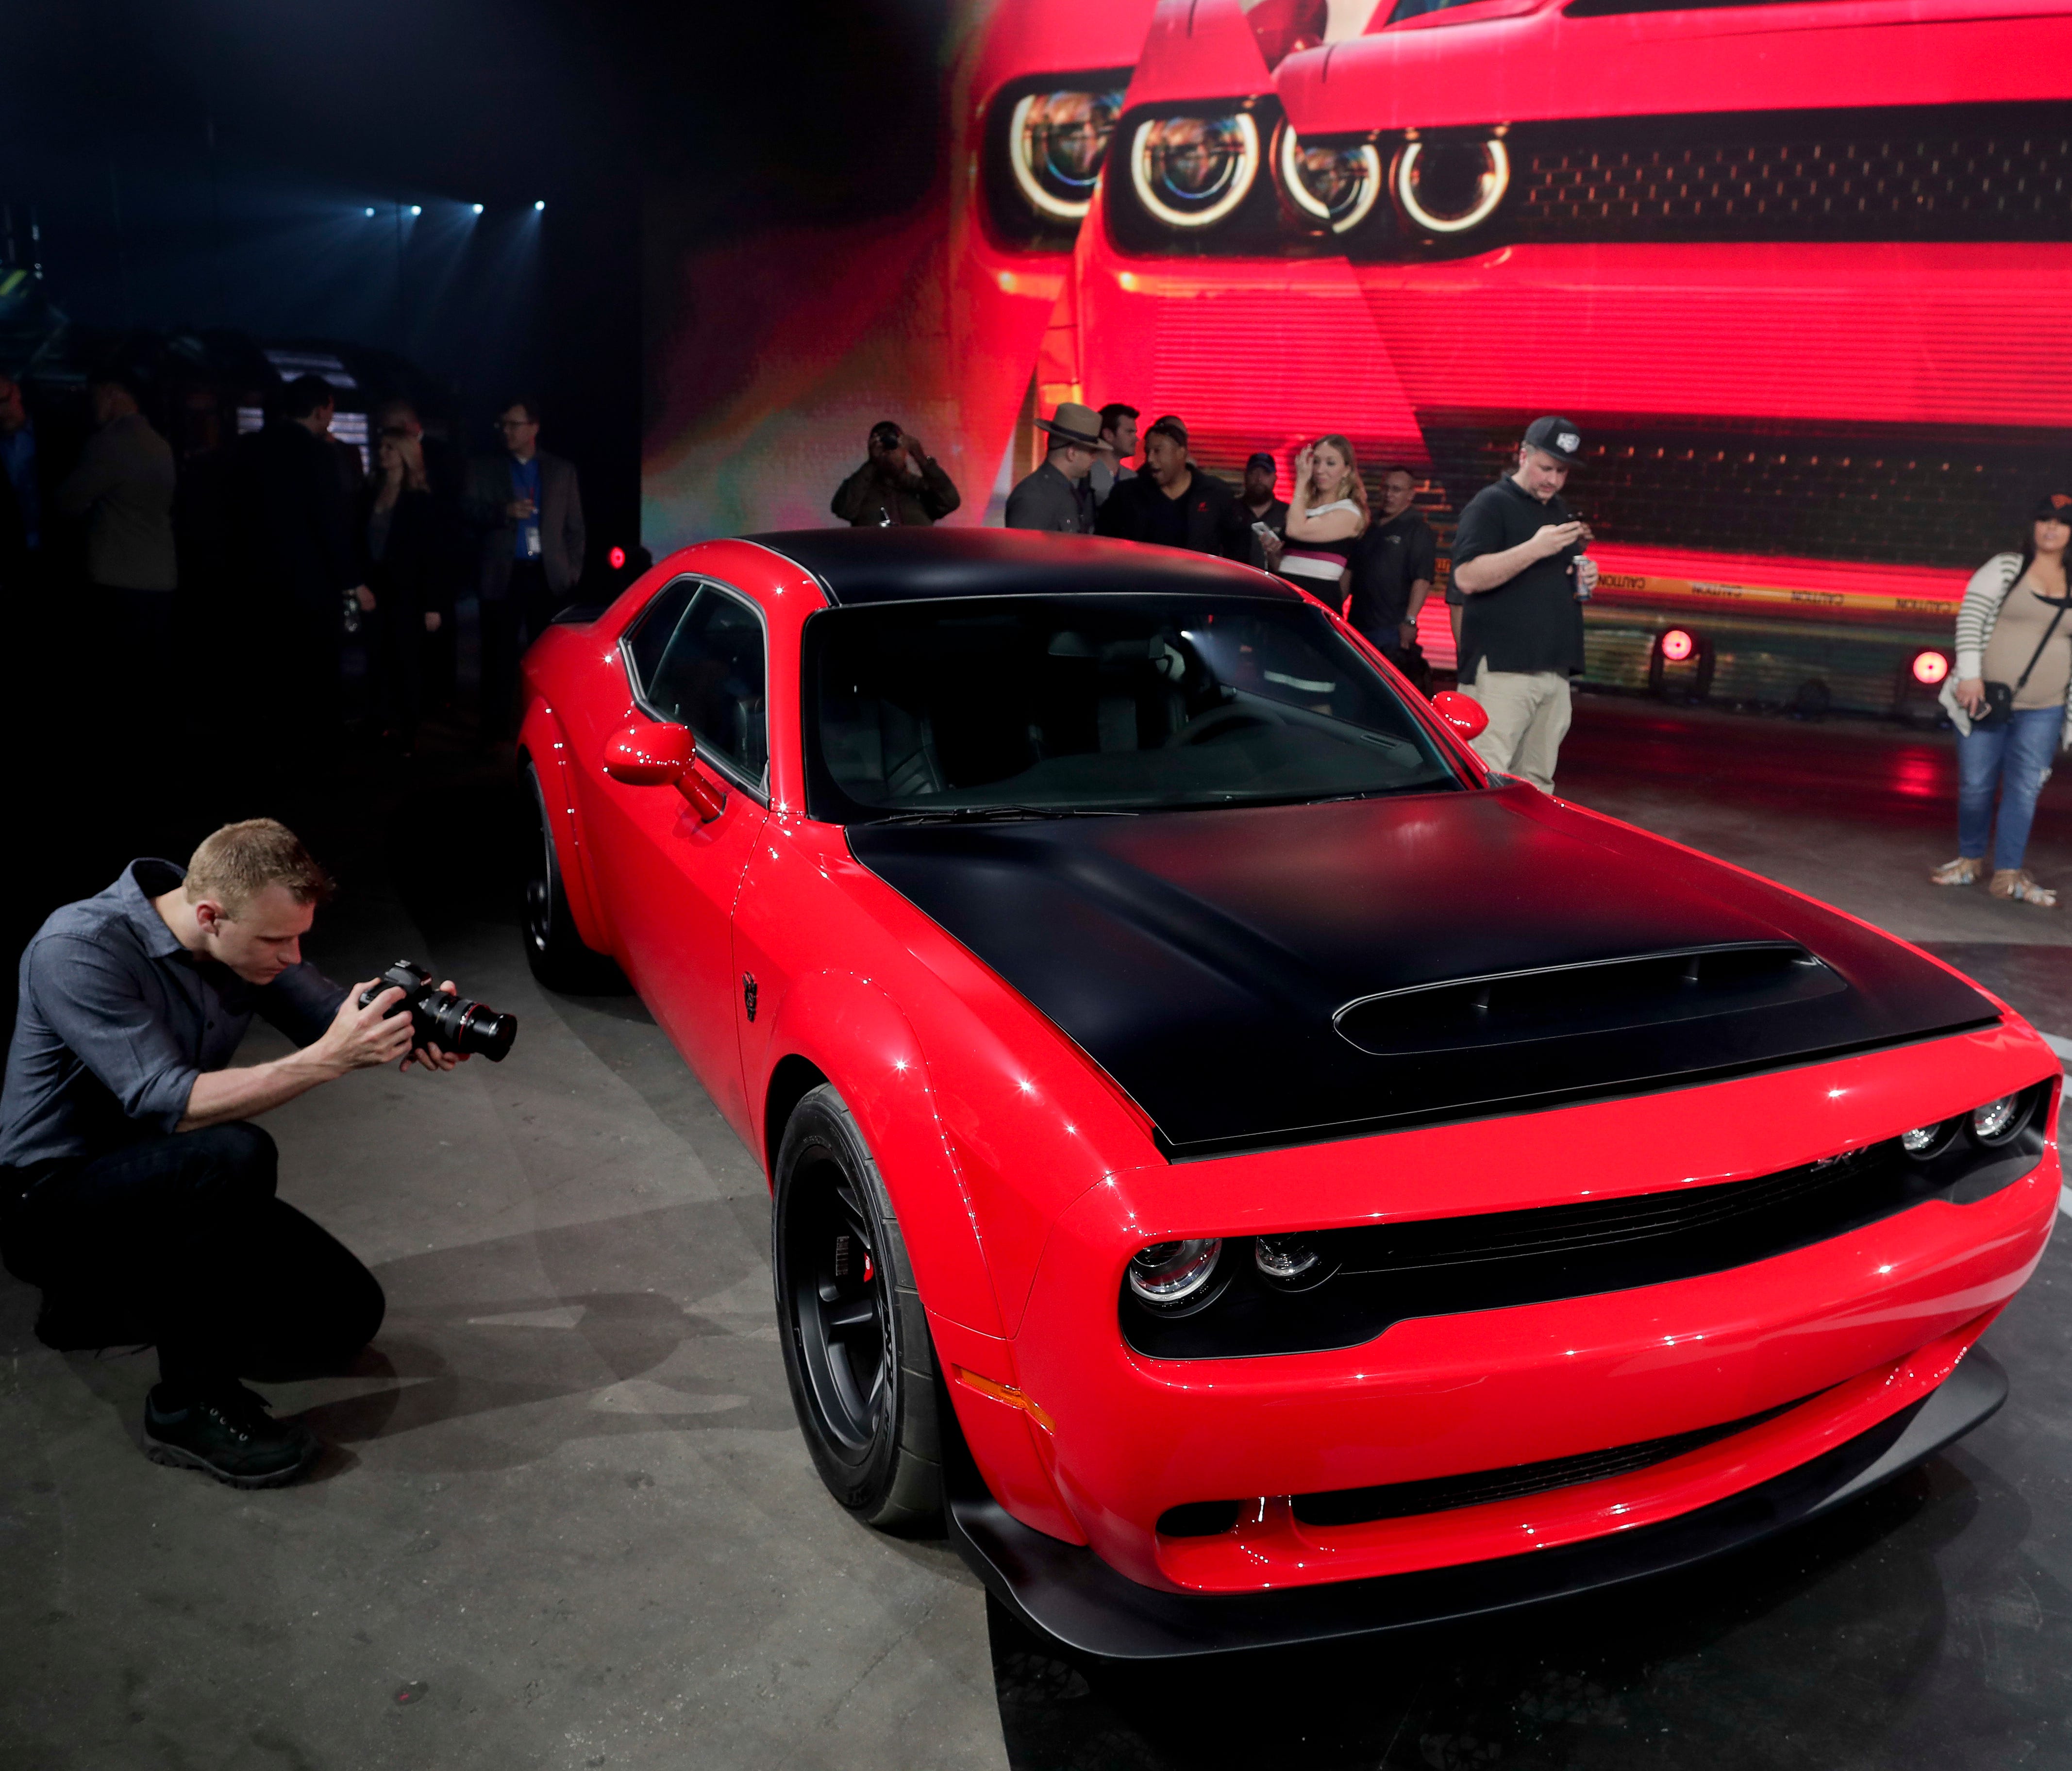 The 2018 Dodge Challenger SRT Demon looks even hotter with a black hood and roof and a red body as seen at the New York International Auto Show last year